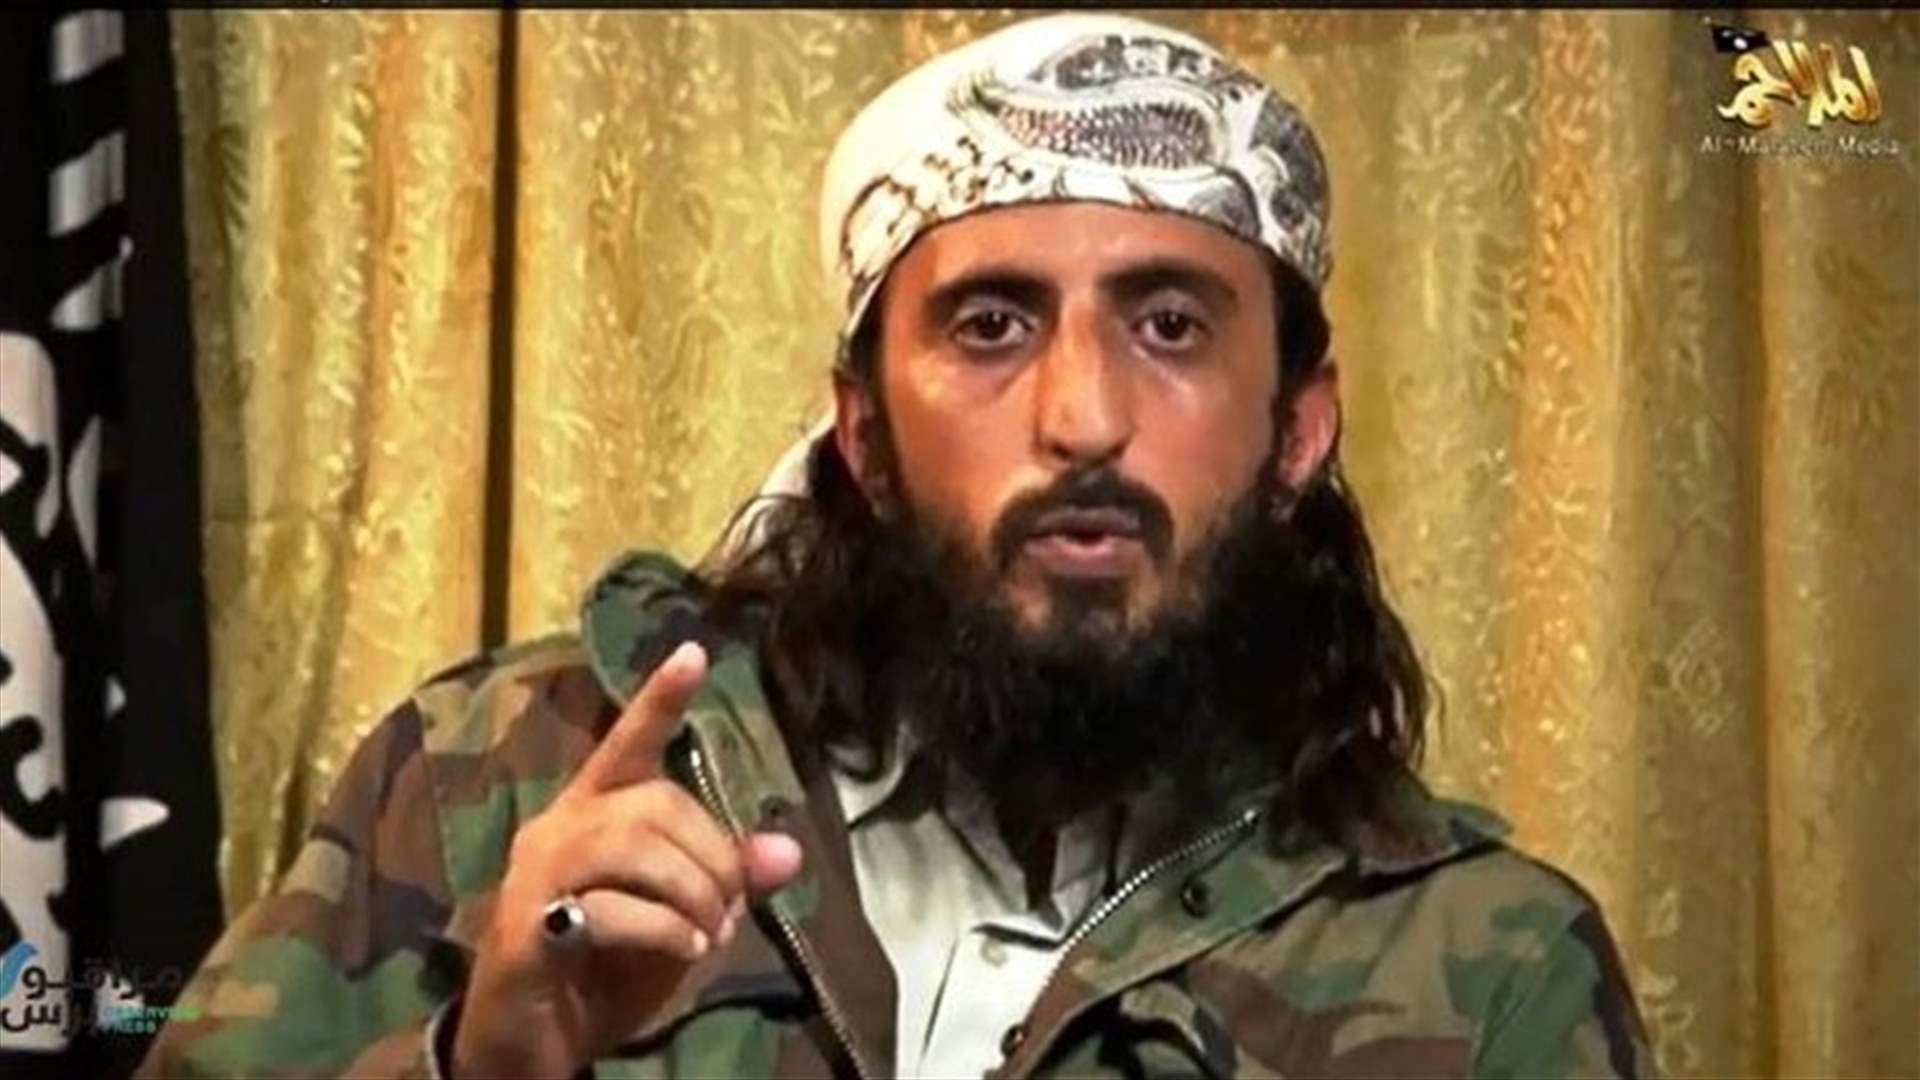 Leader of Islamic State in Yemen killed in drone strike - residents, officials